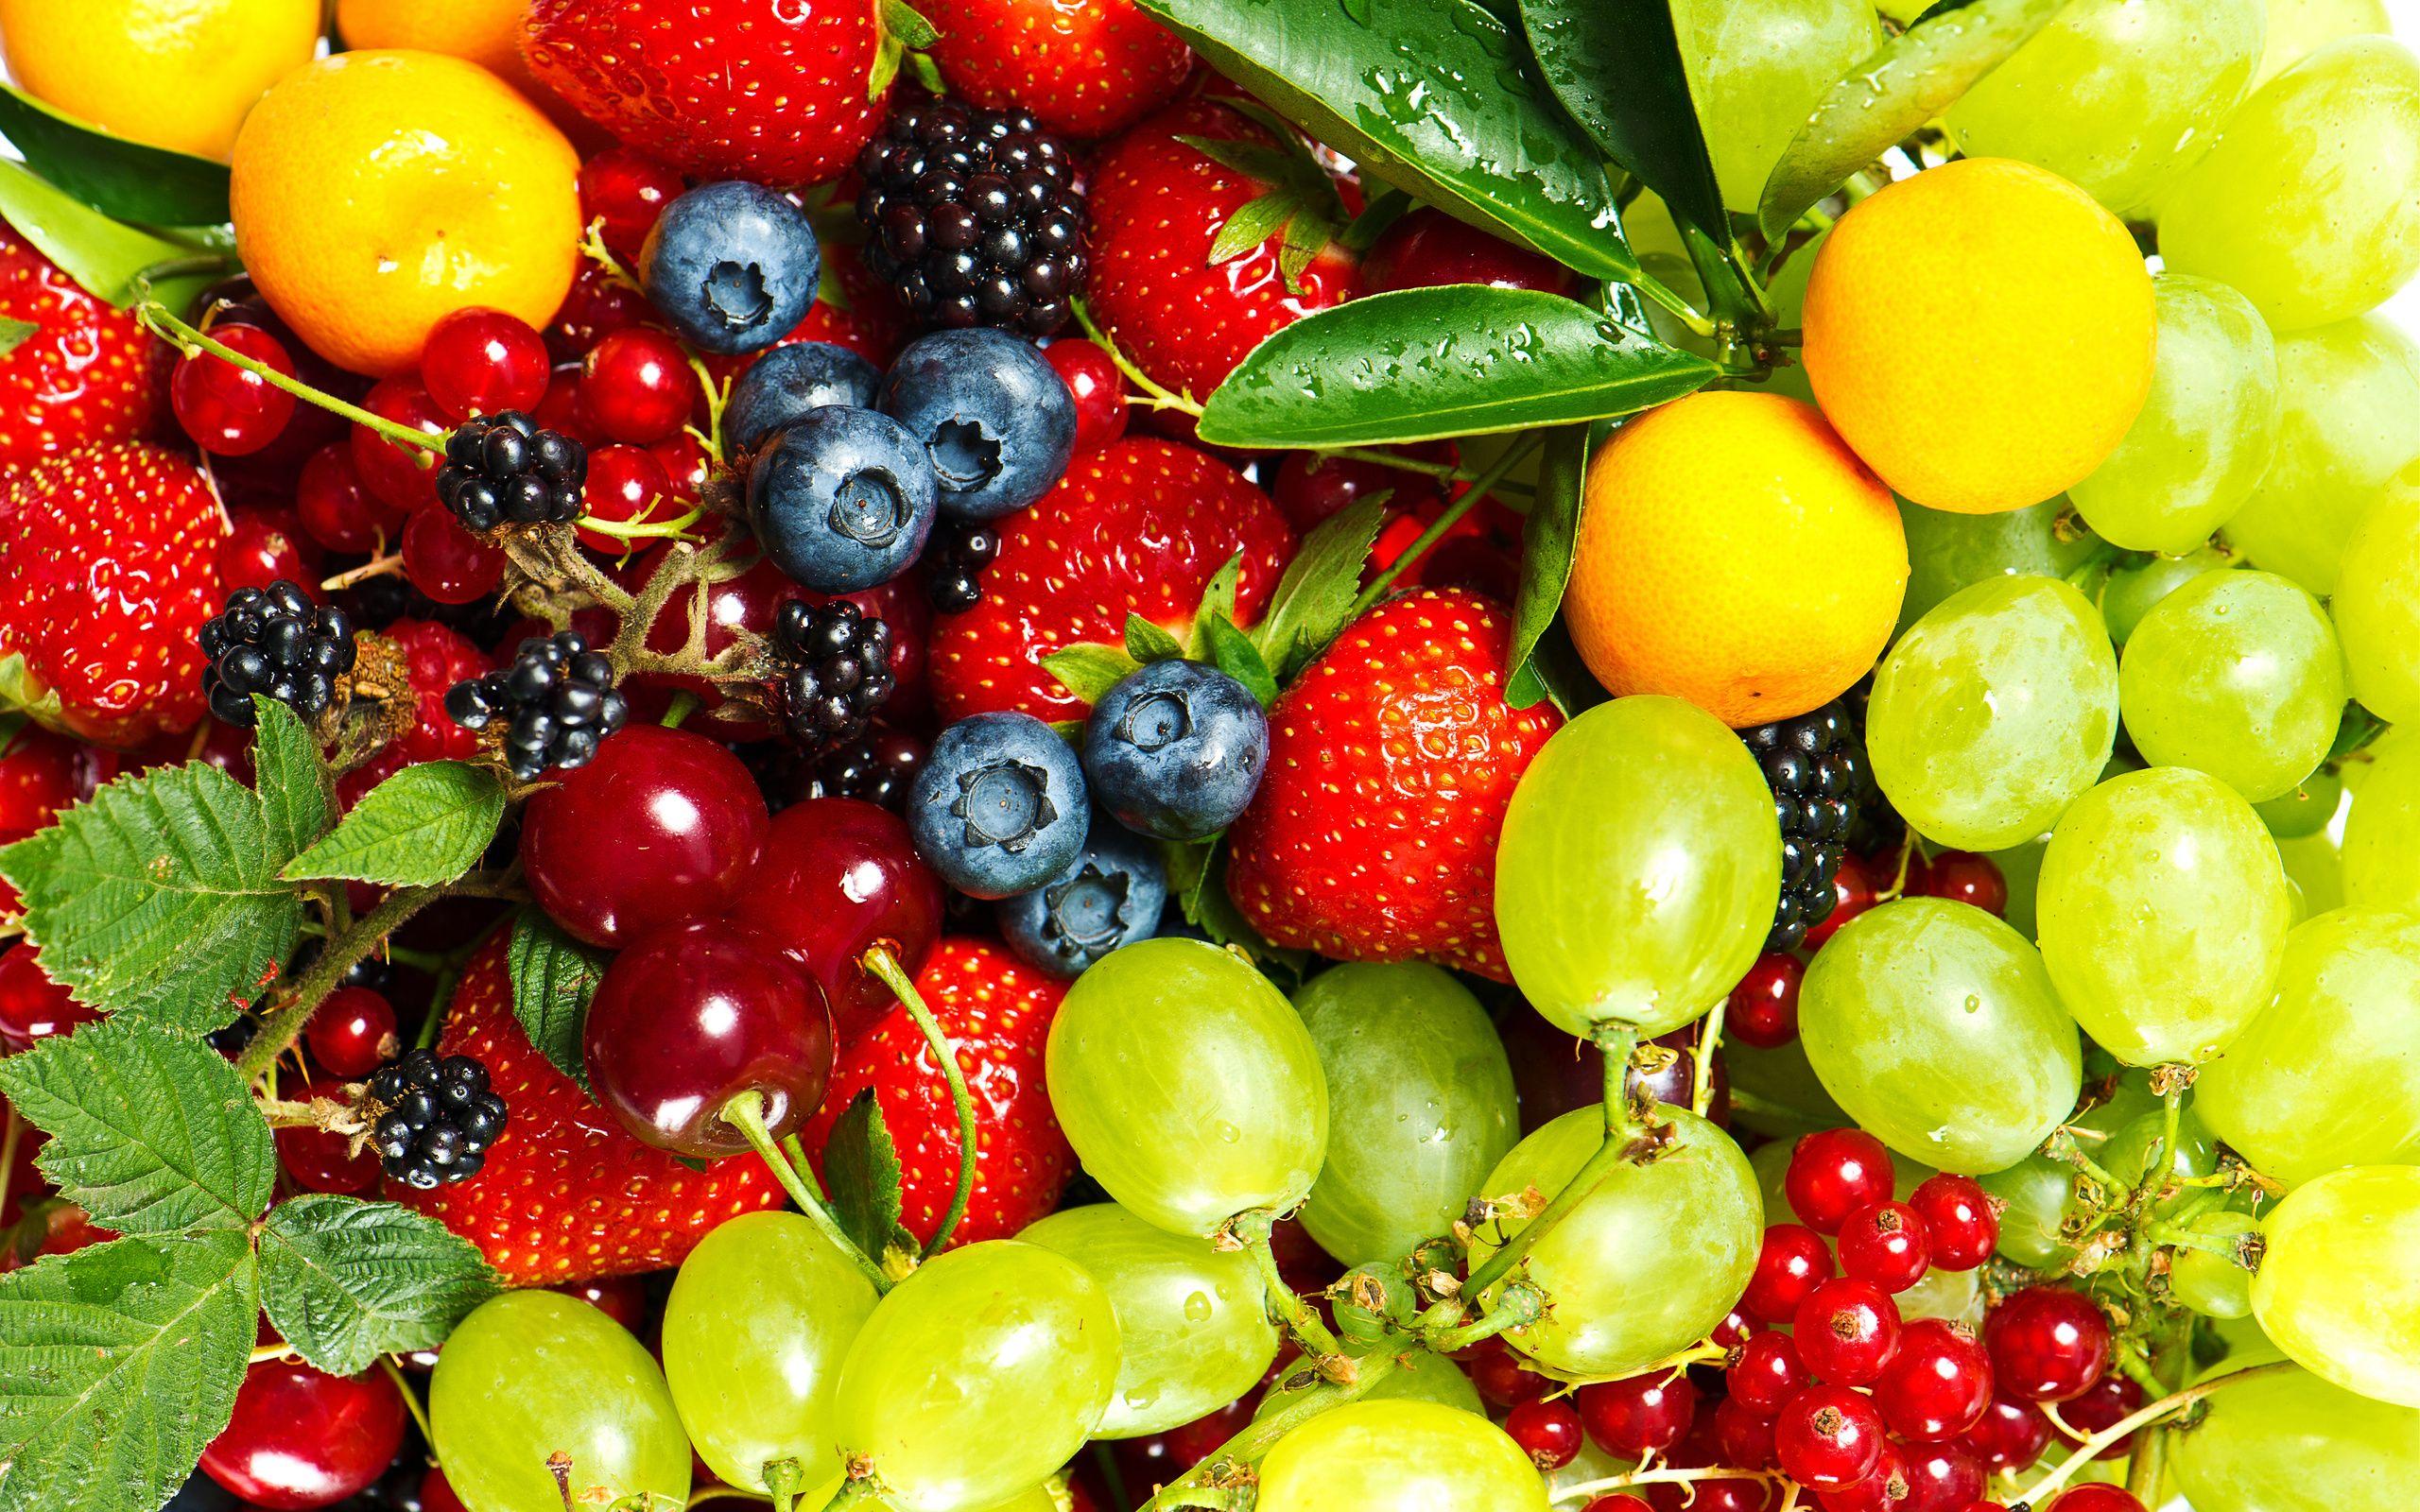 fruits images hd free